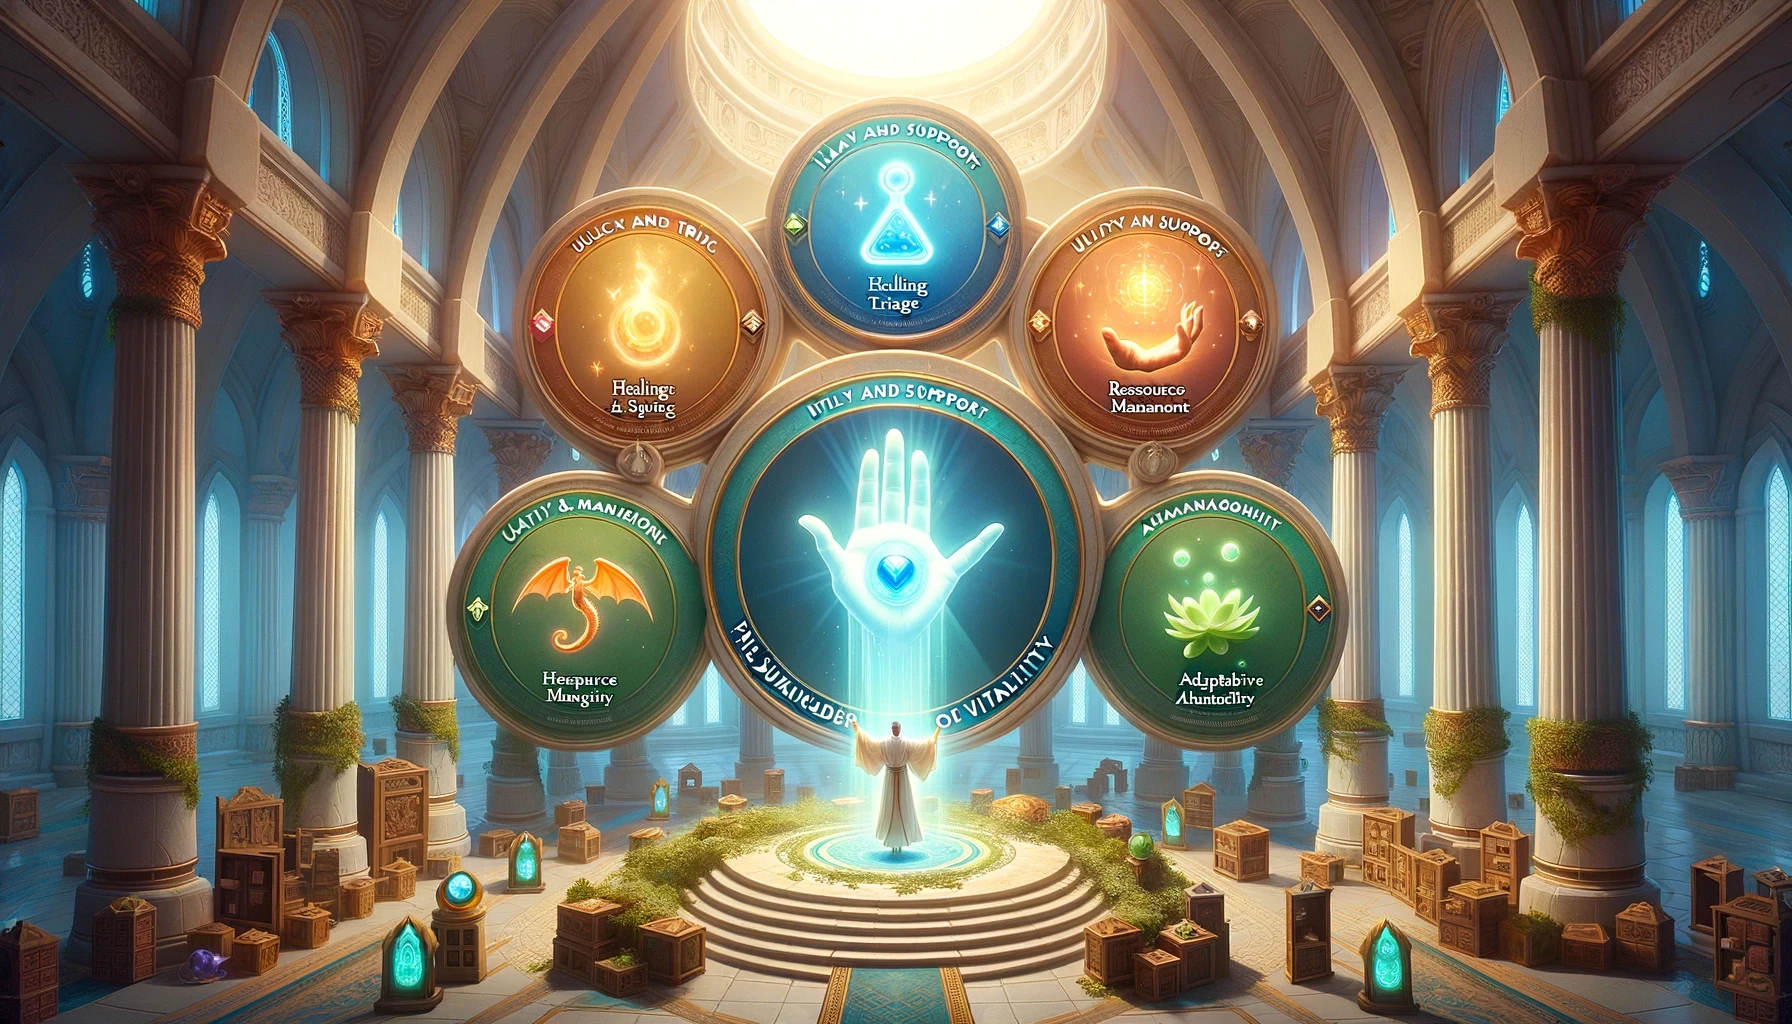 Representation of Key Healing Principles and Strategies in Mythic+